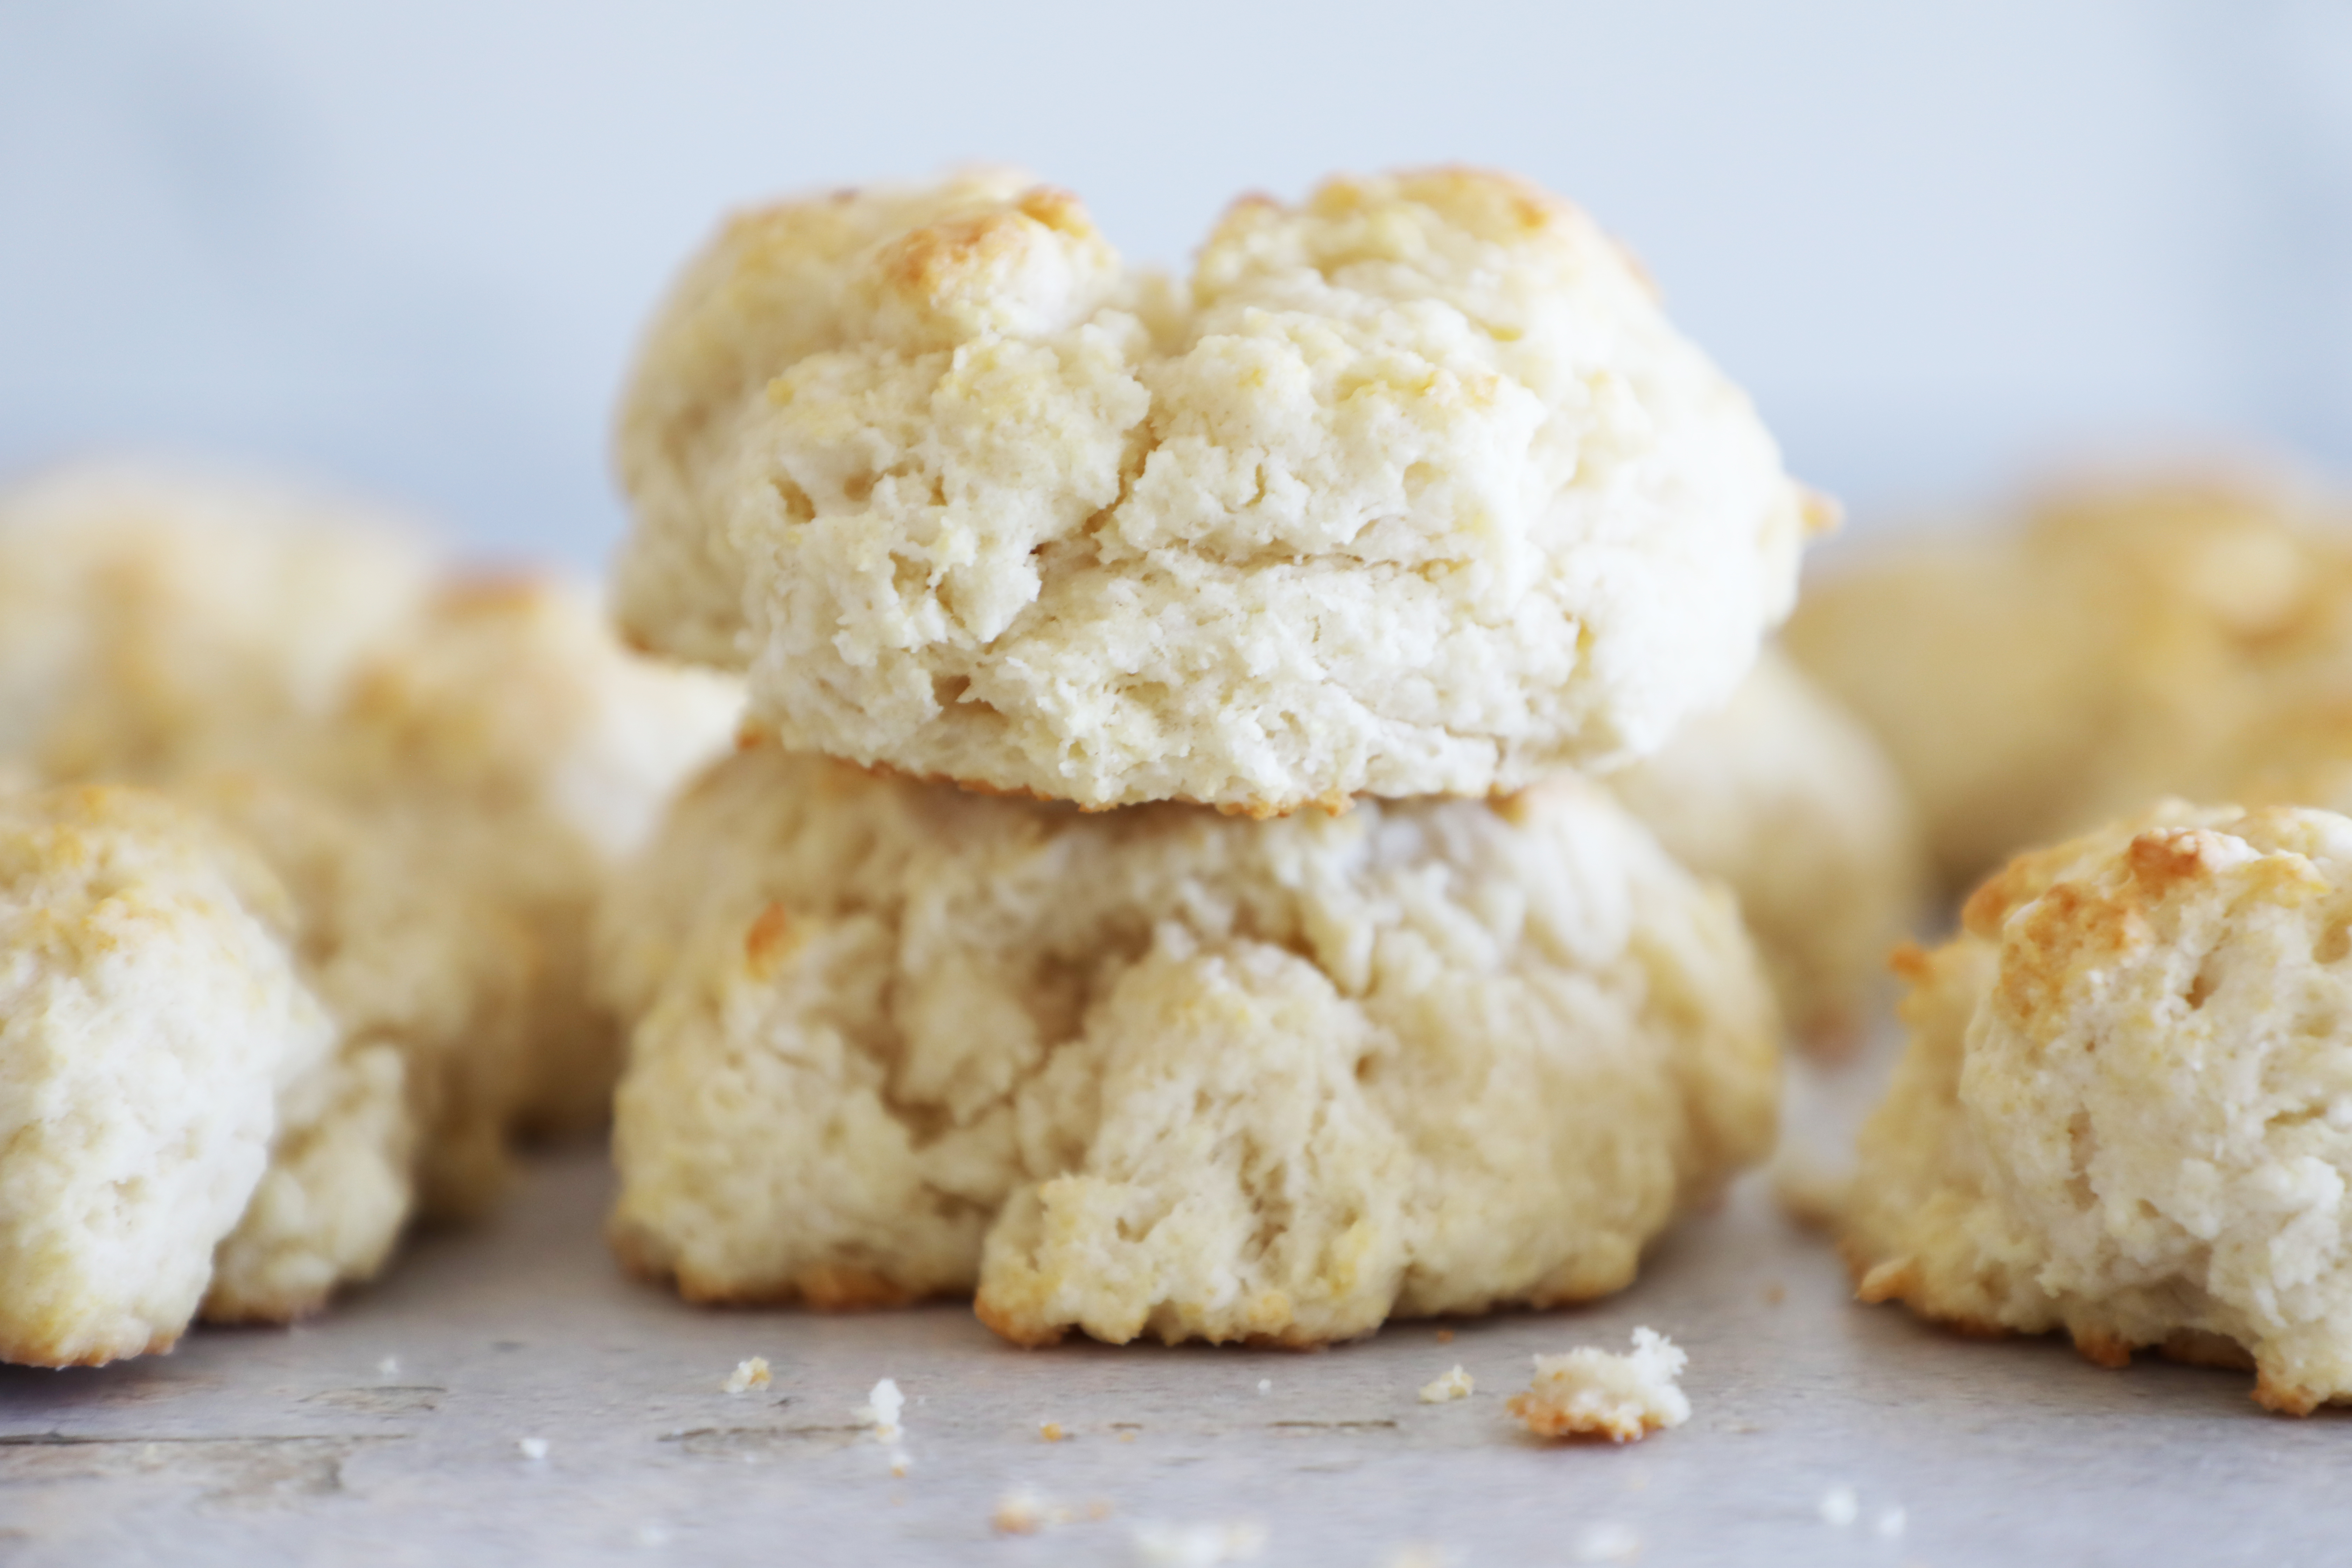 Several homemade biscuits gathered on a concrete countertop.